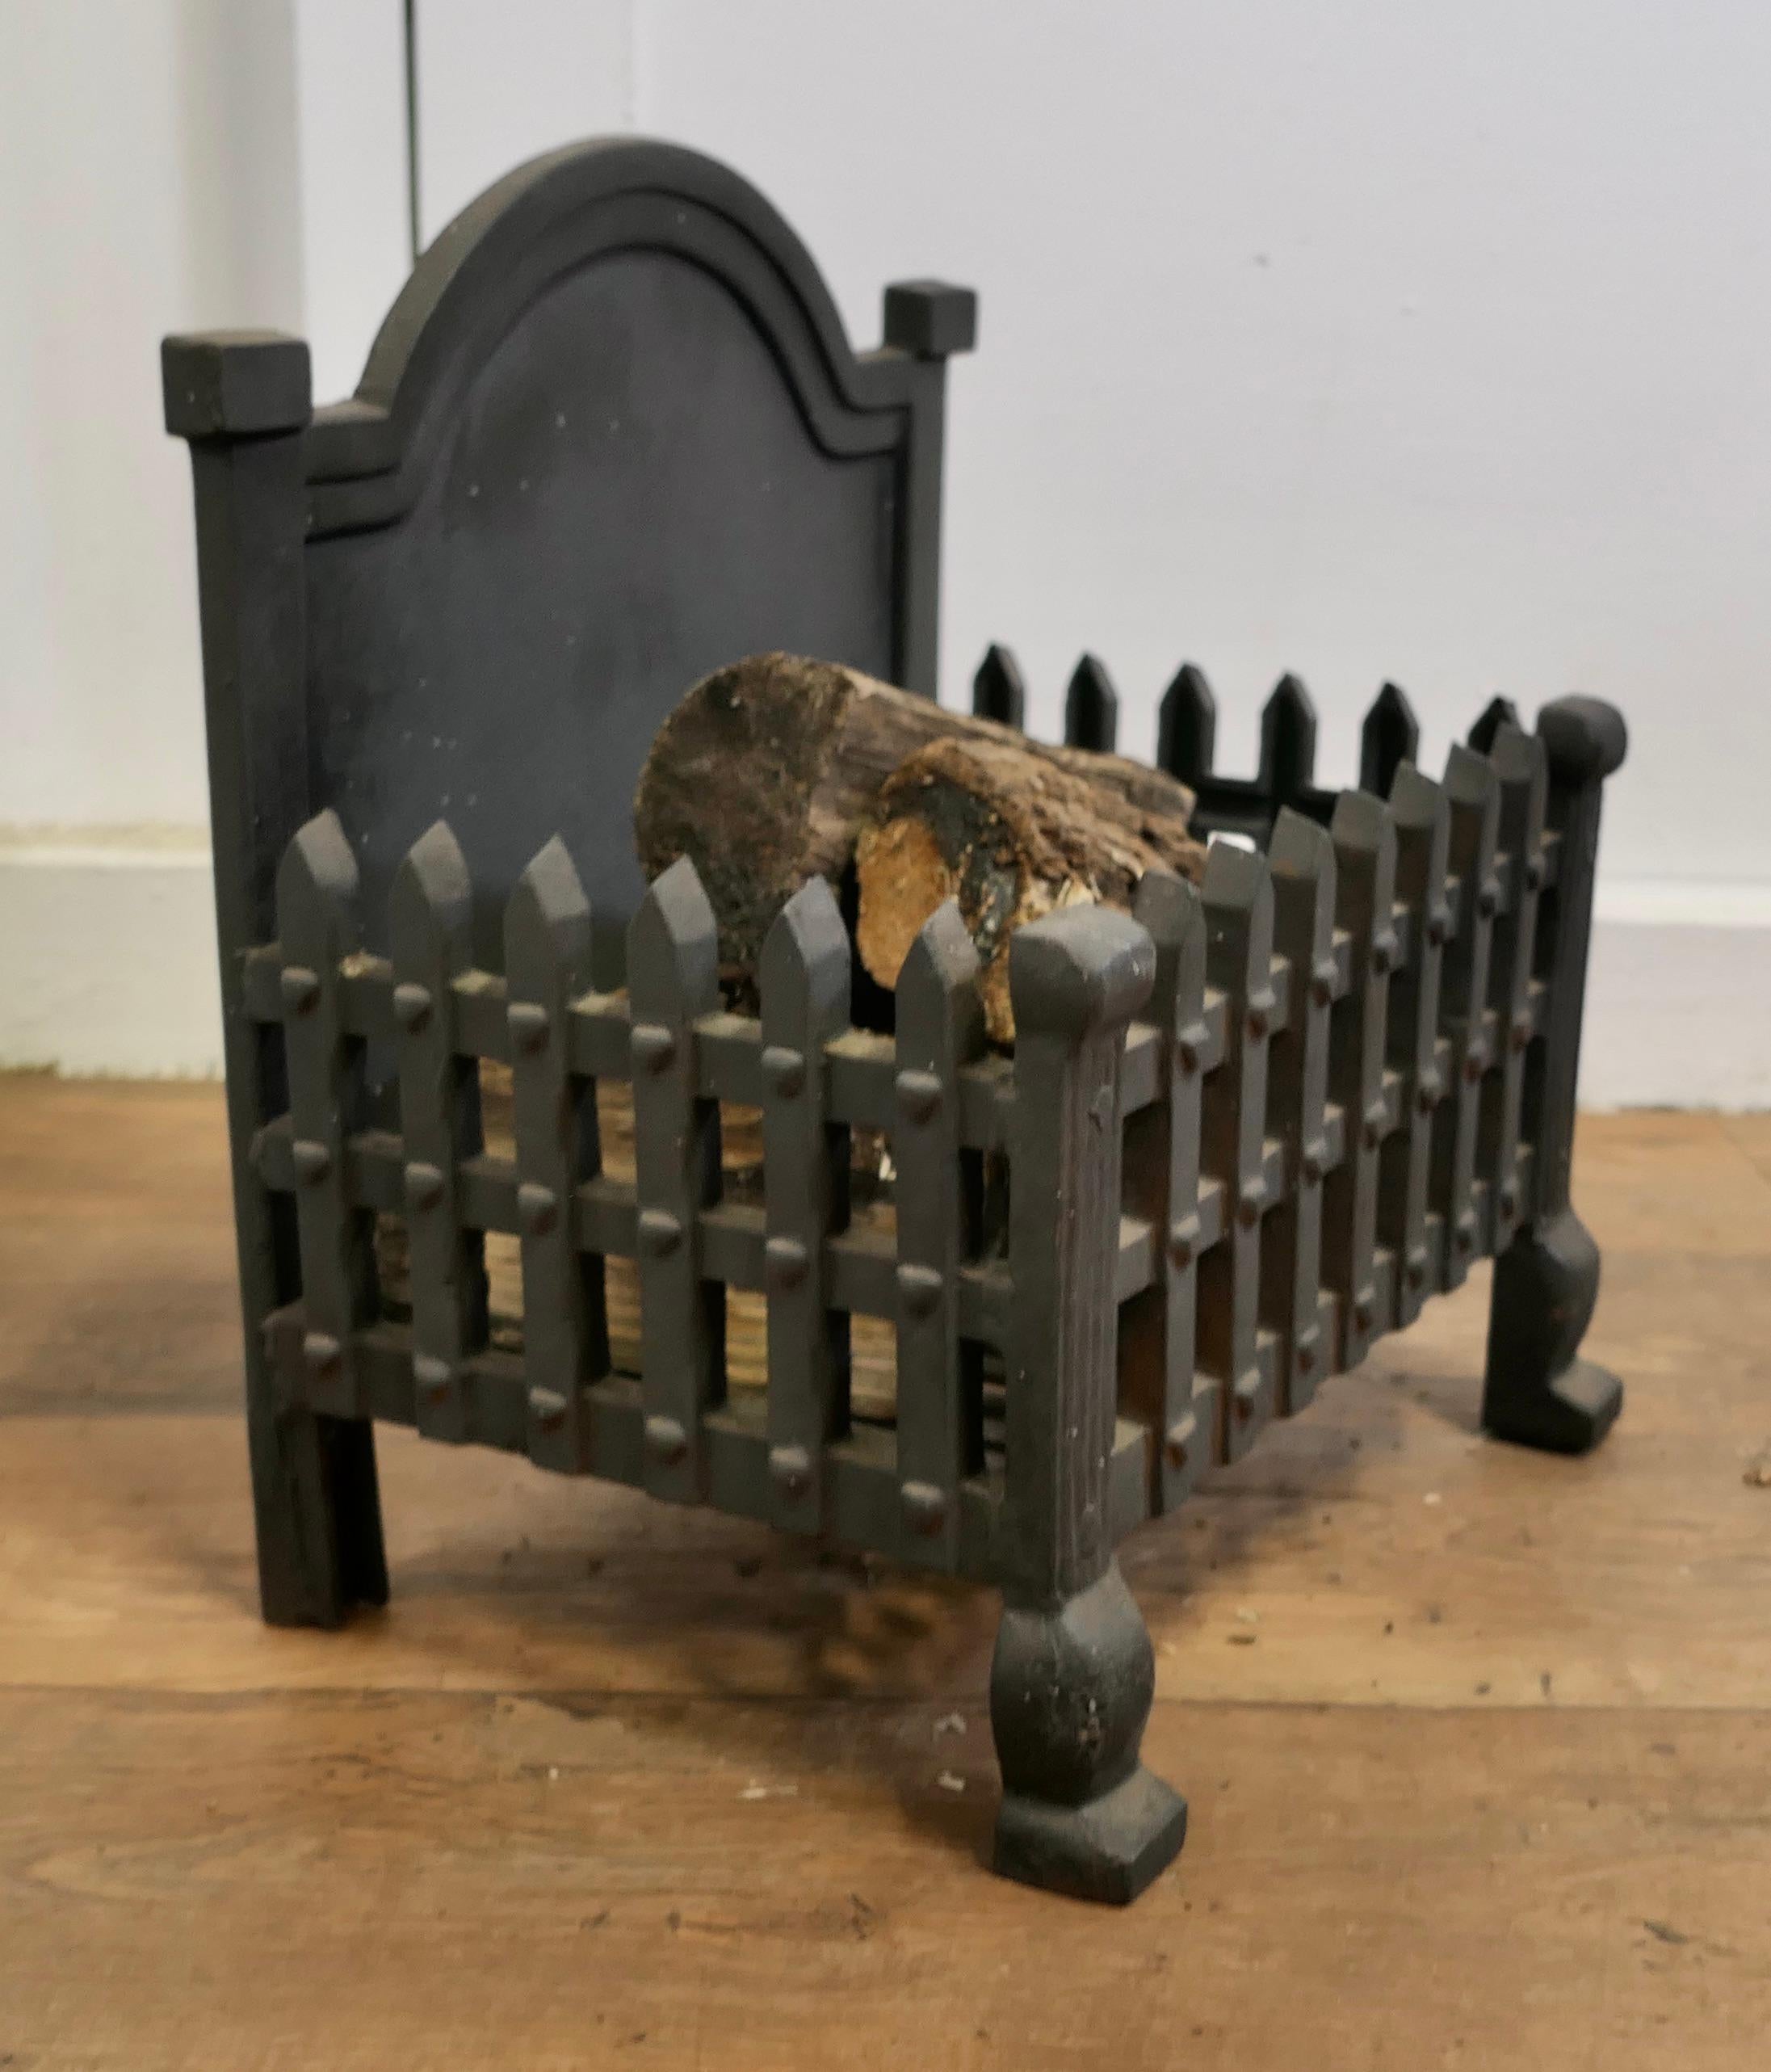 Mid-20th Century Gothic Style Free Standing Fire Basket, Grate  This is a useful and decorative p For Sale